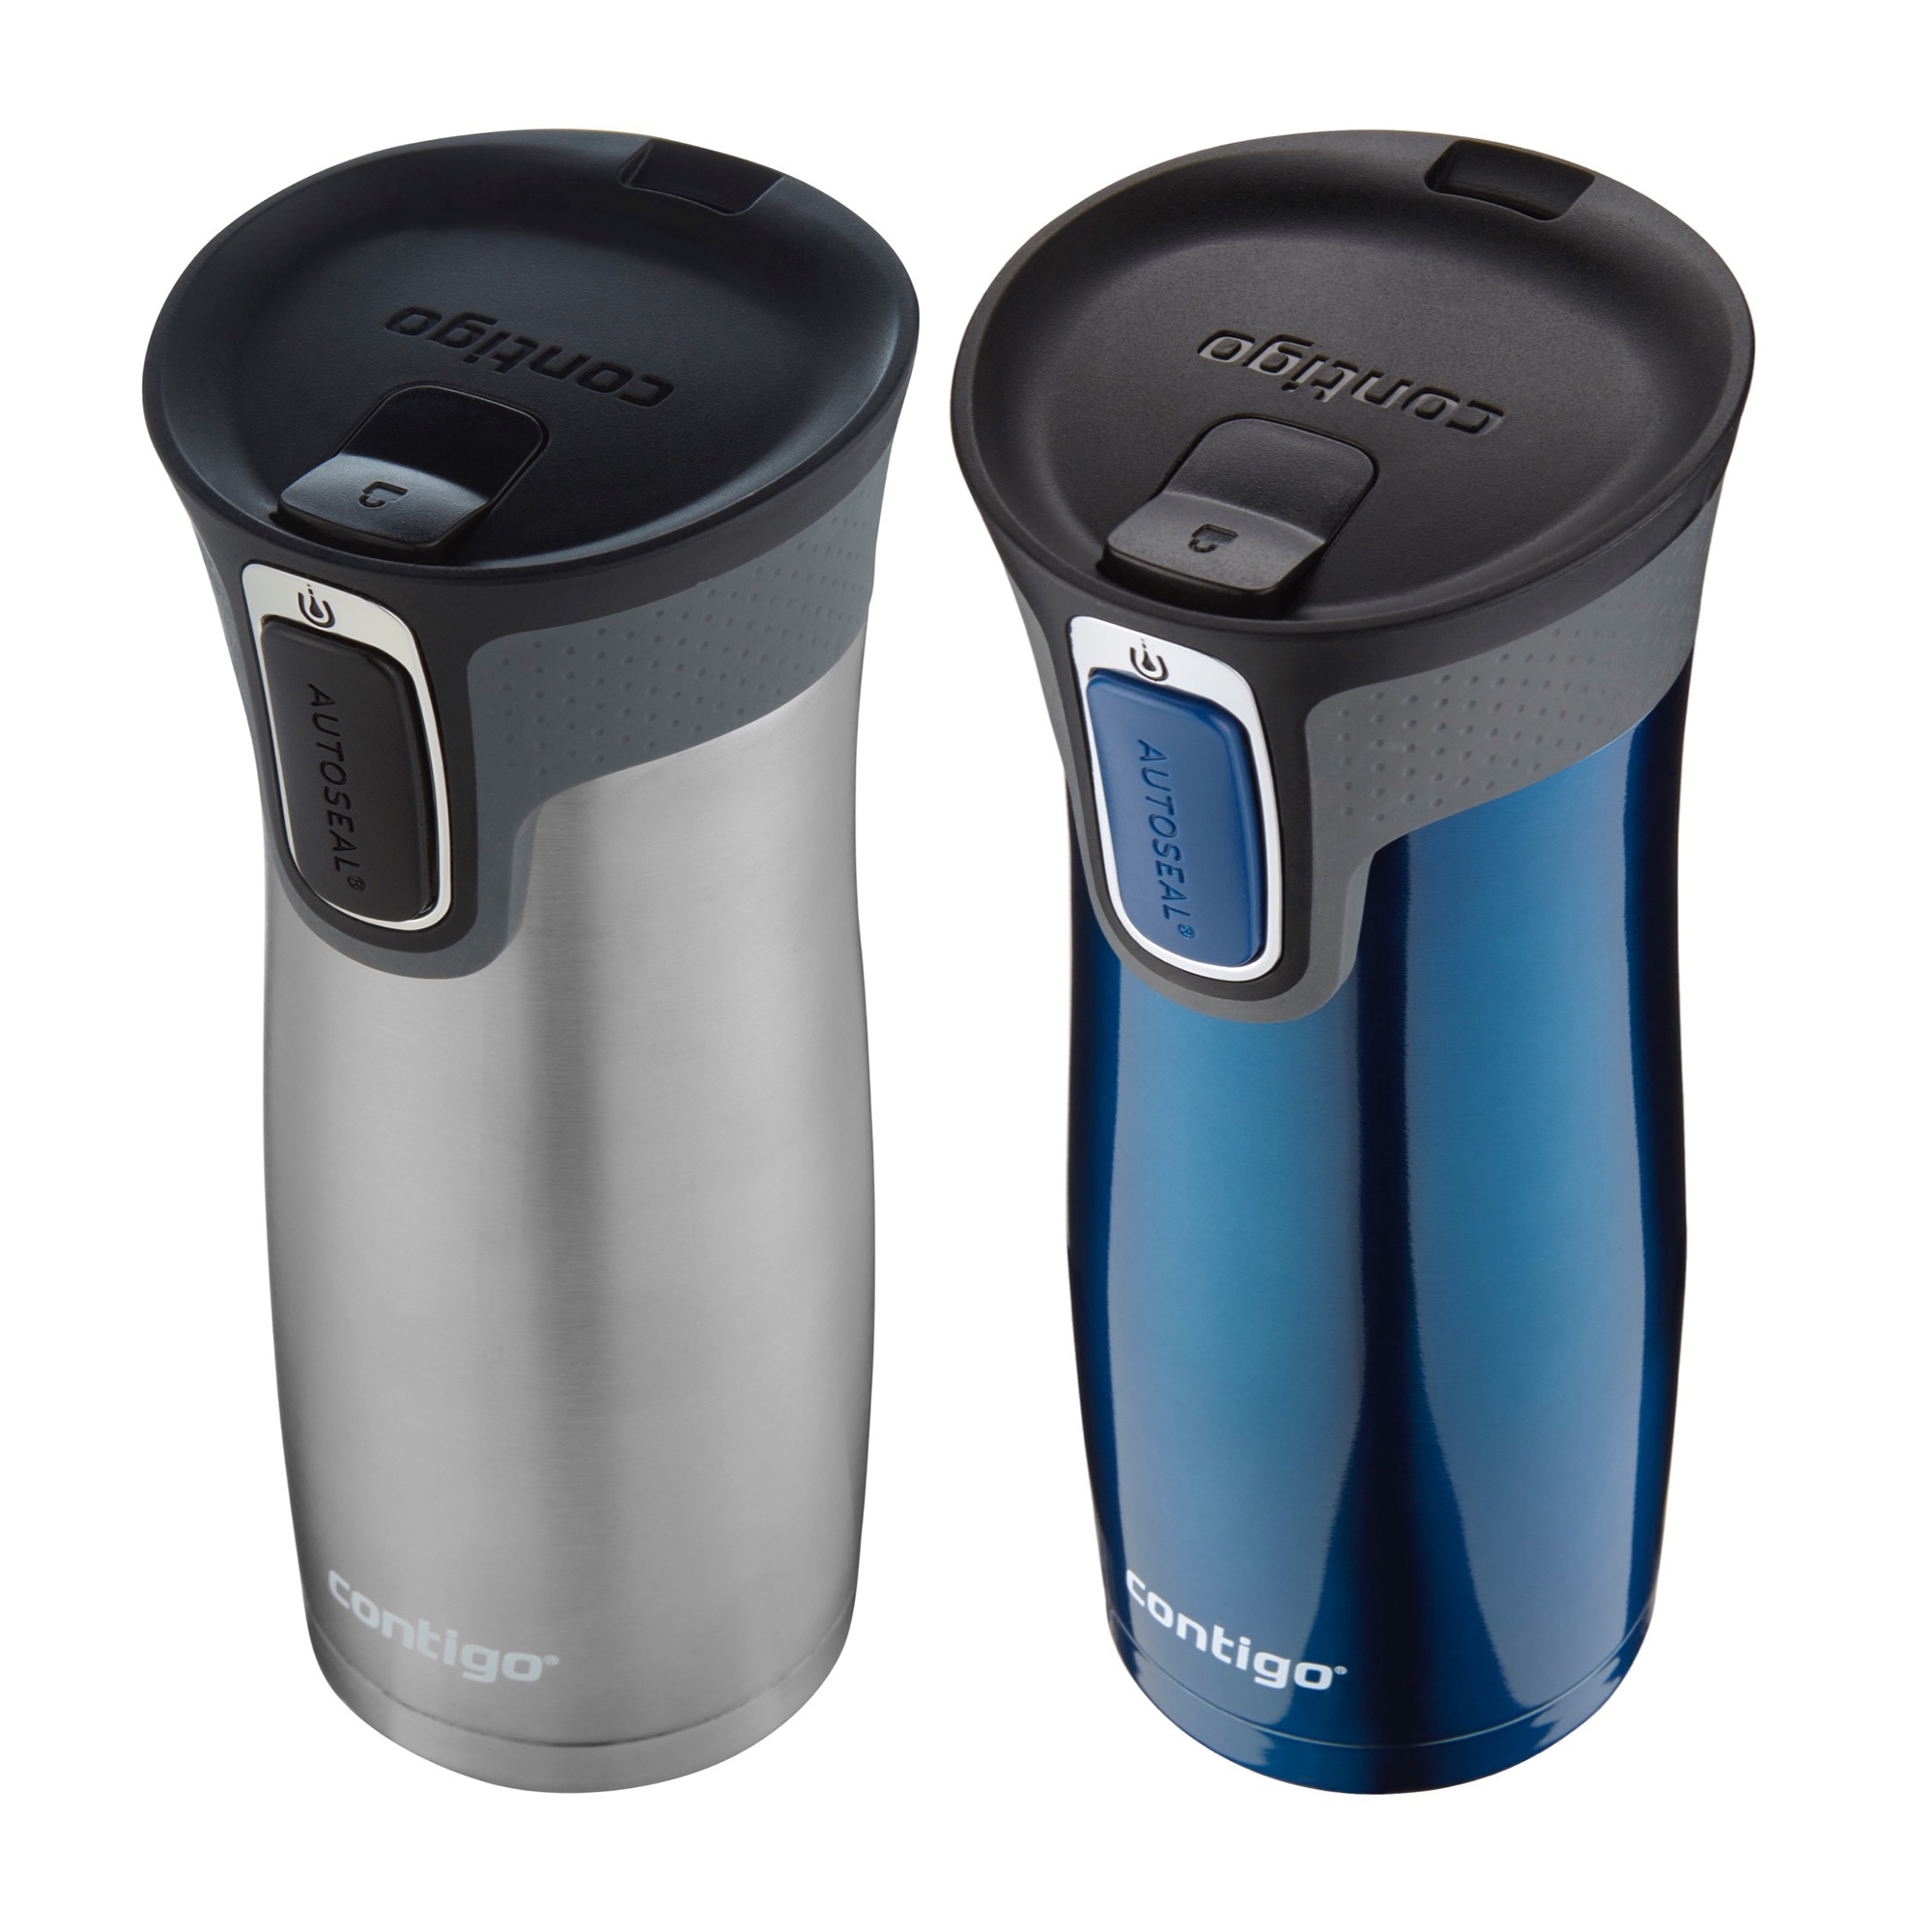 Contigo Autoseal West Loop Vacuum-insulated Stainless Steel Travel Mug with Easy-clean Lid, 16 Oz., Monaco & Stainless Steel, 2-Pack - image 3 of 8